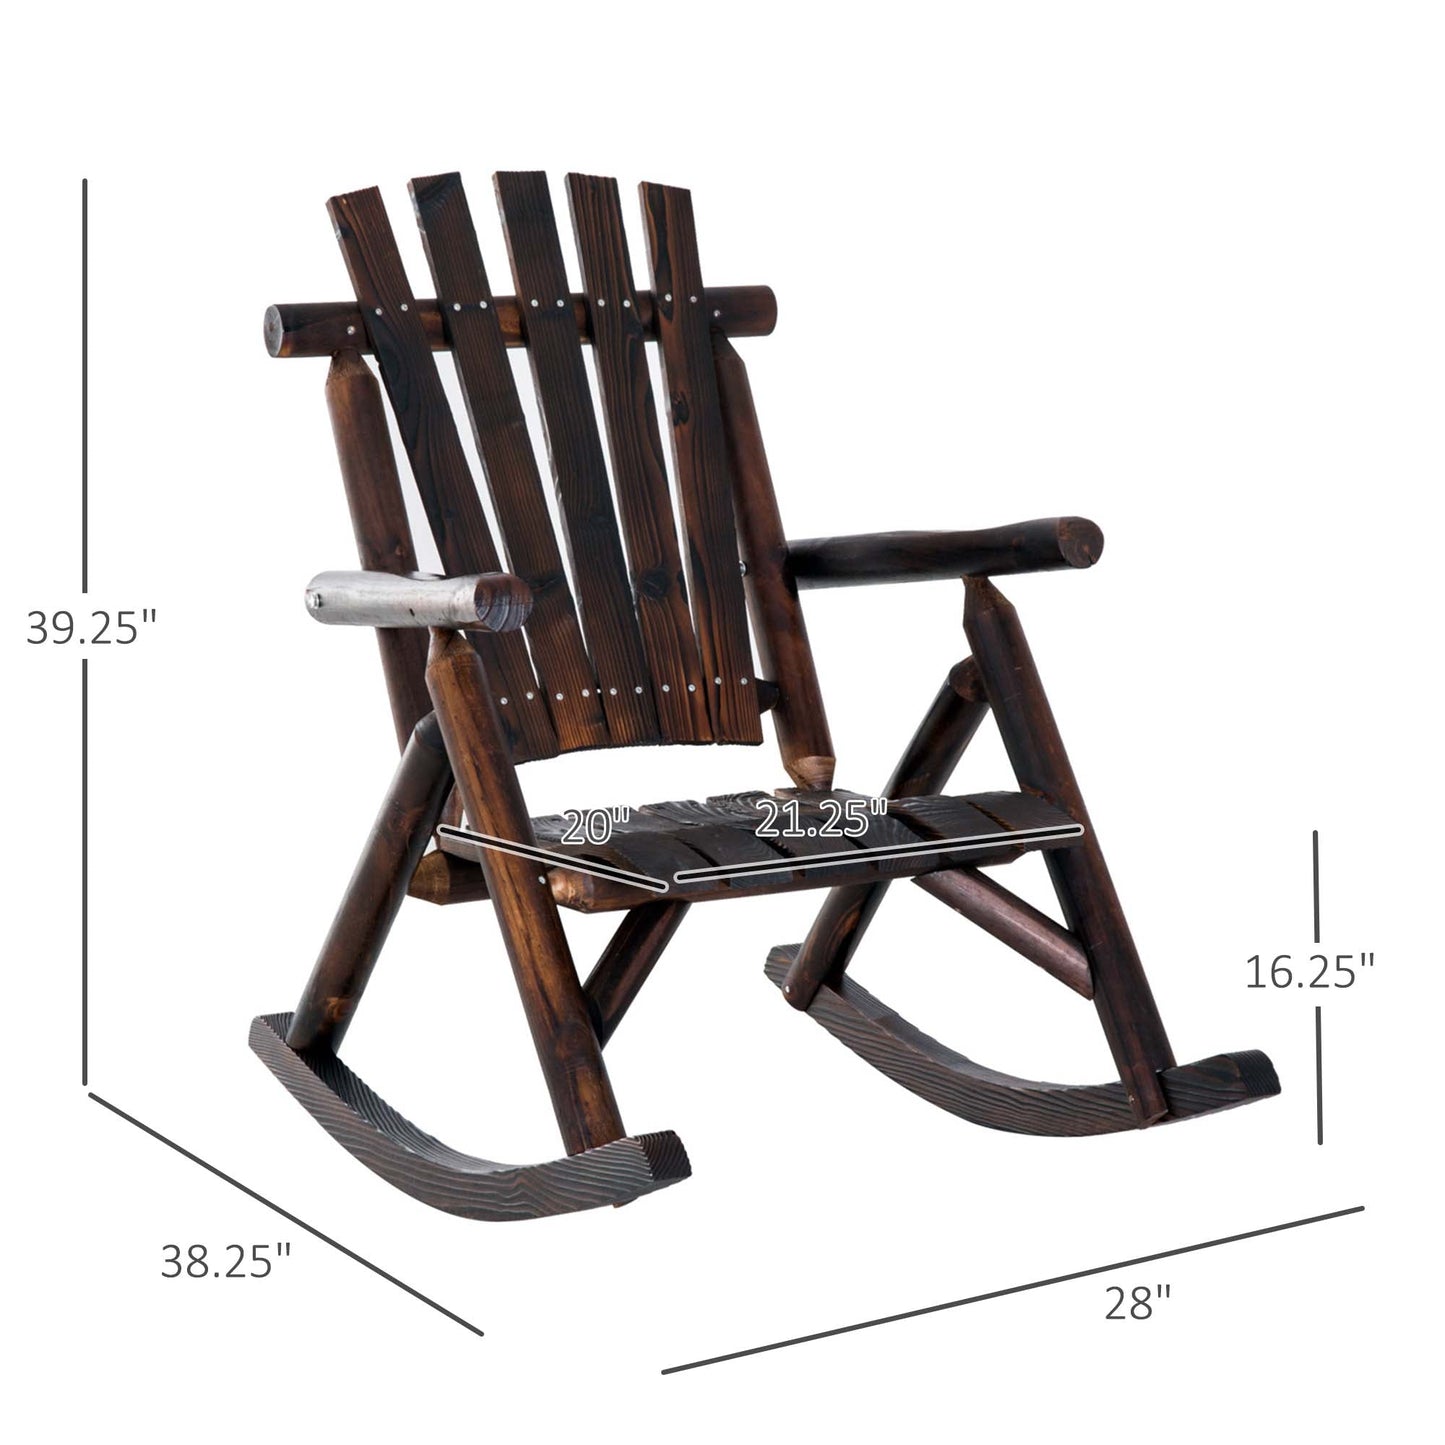 Outdoor and Garden-Wooden Rustic Rocking Chair, Indoor Outdoor Adirondack Log Rocker with Slatted Design for Patio, Lawn, Carbonized Color - Outdoor Style Company